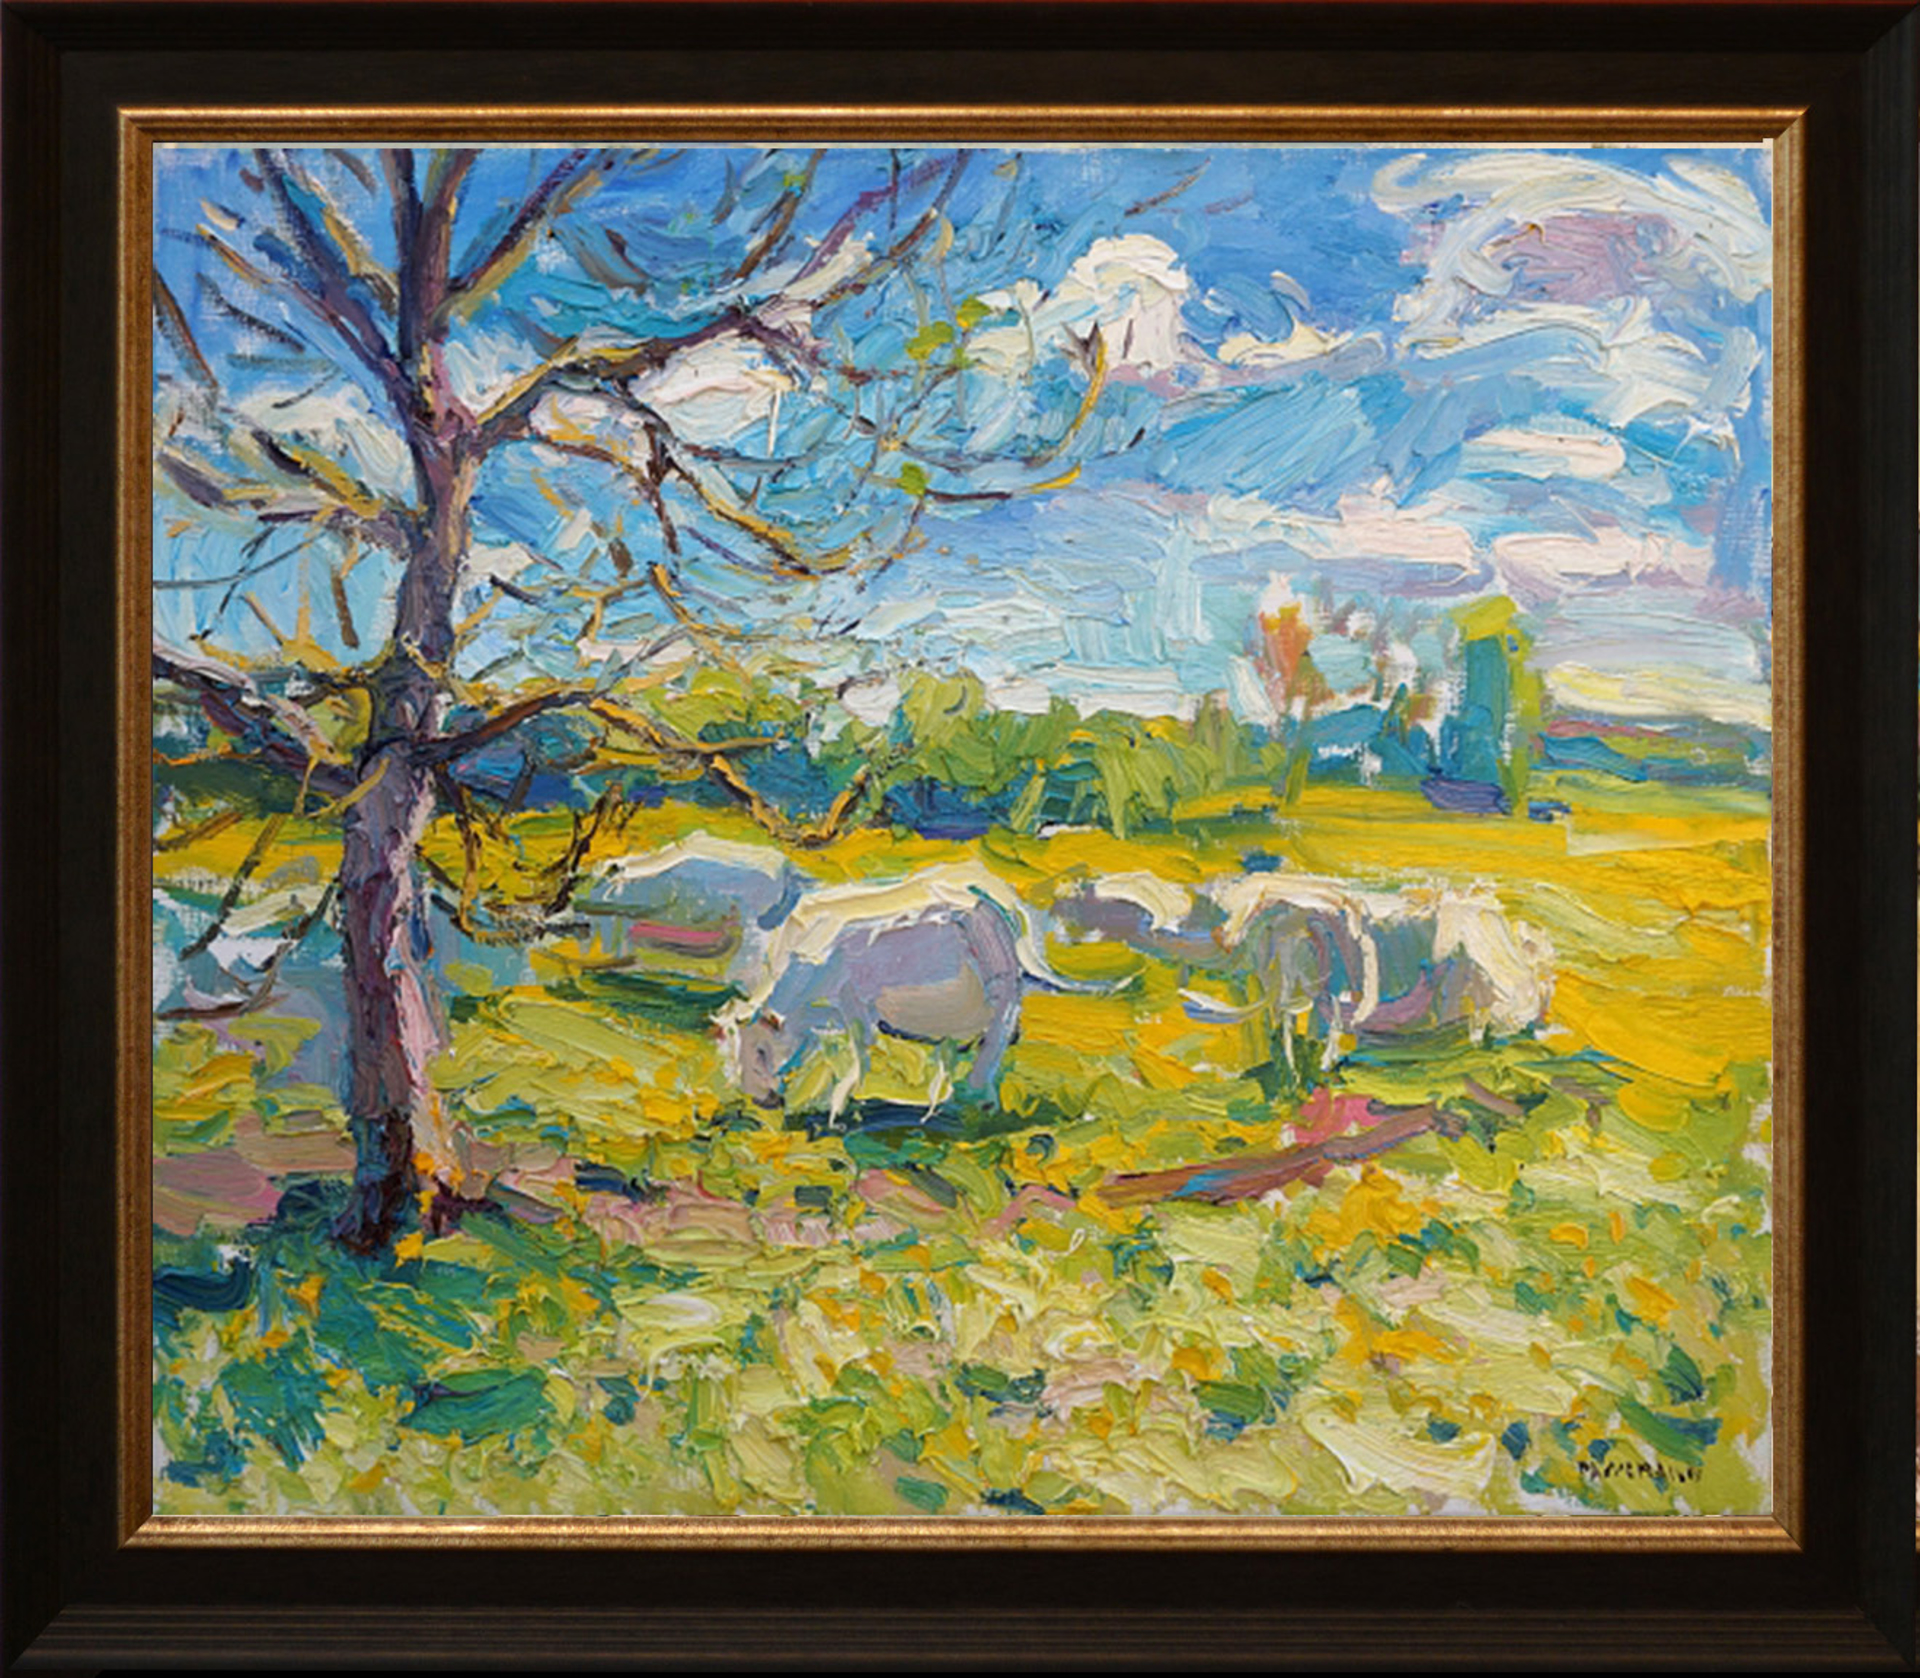 Cows in the Sun by Antonin Passemard